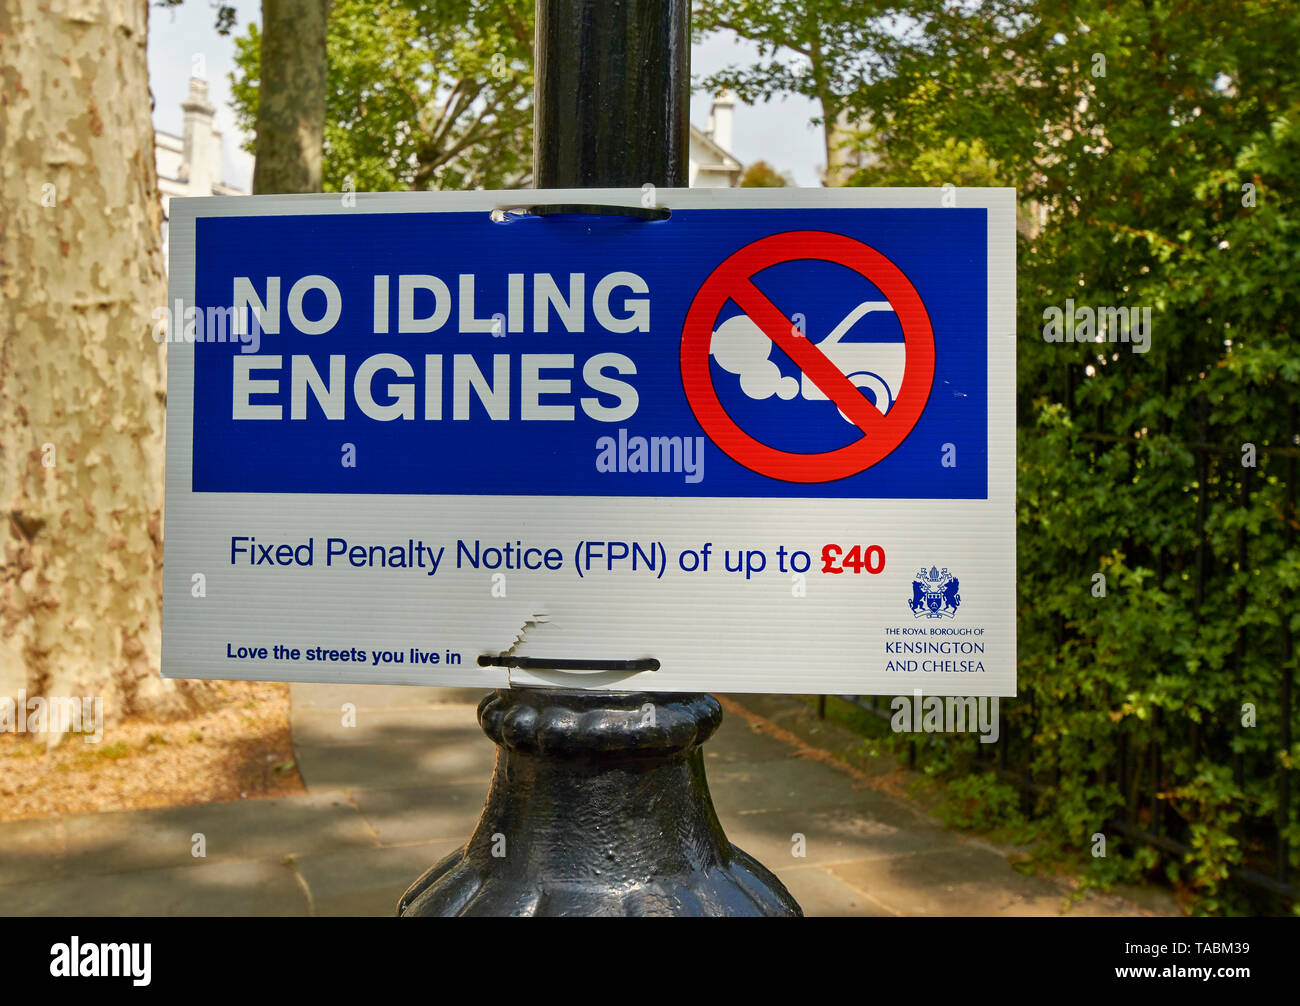 LONDON NOTTING HILL FIXED PENALTY NOTICE NO IDLING ENGINES Stock Photo